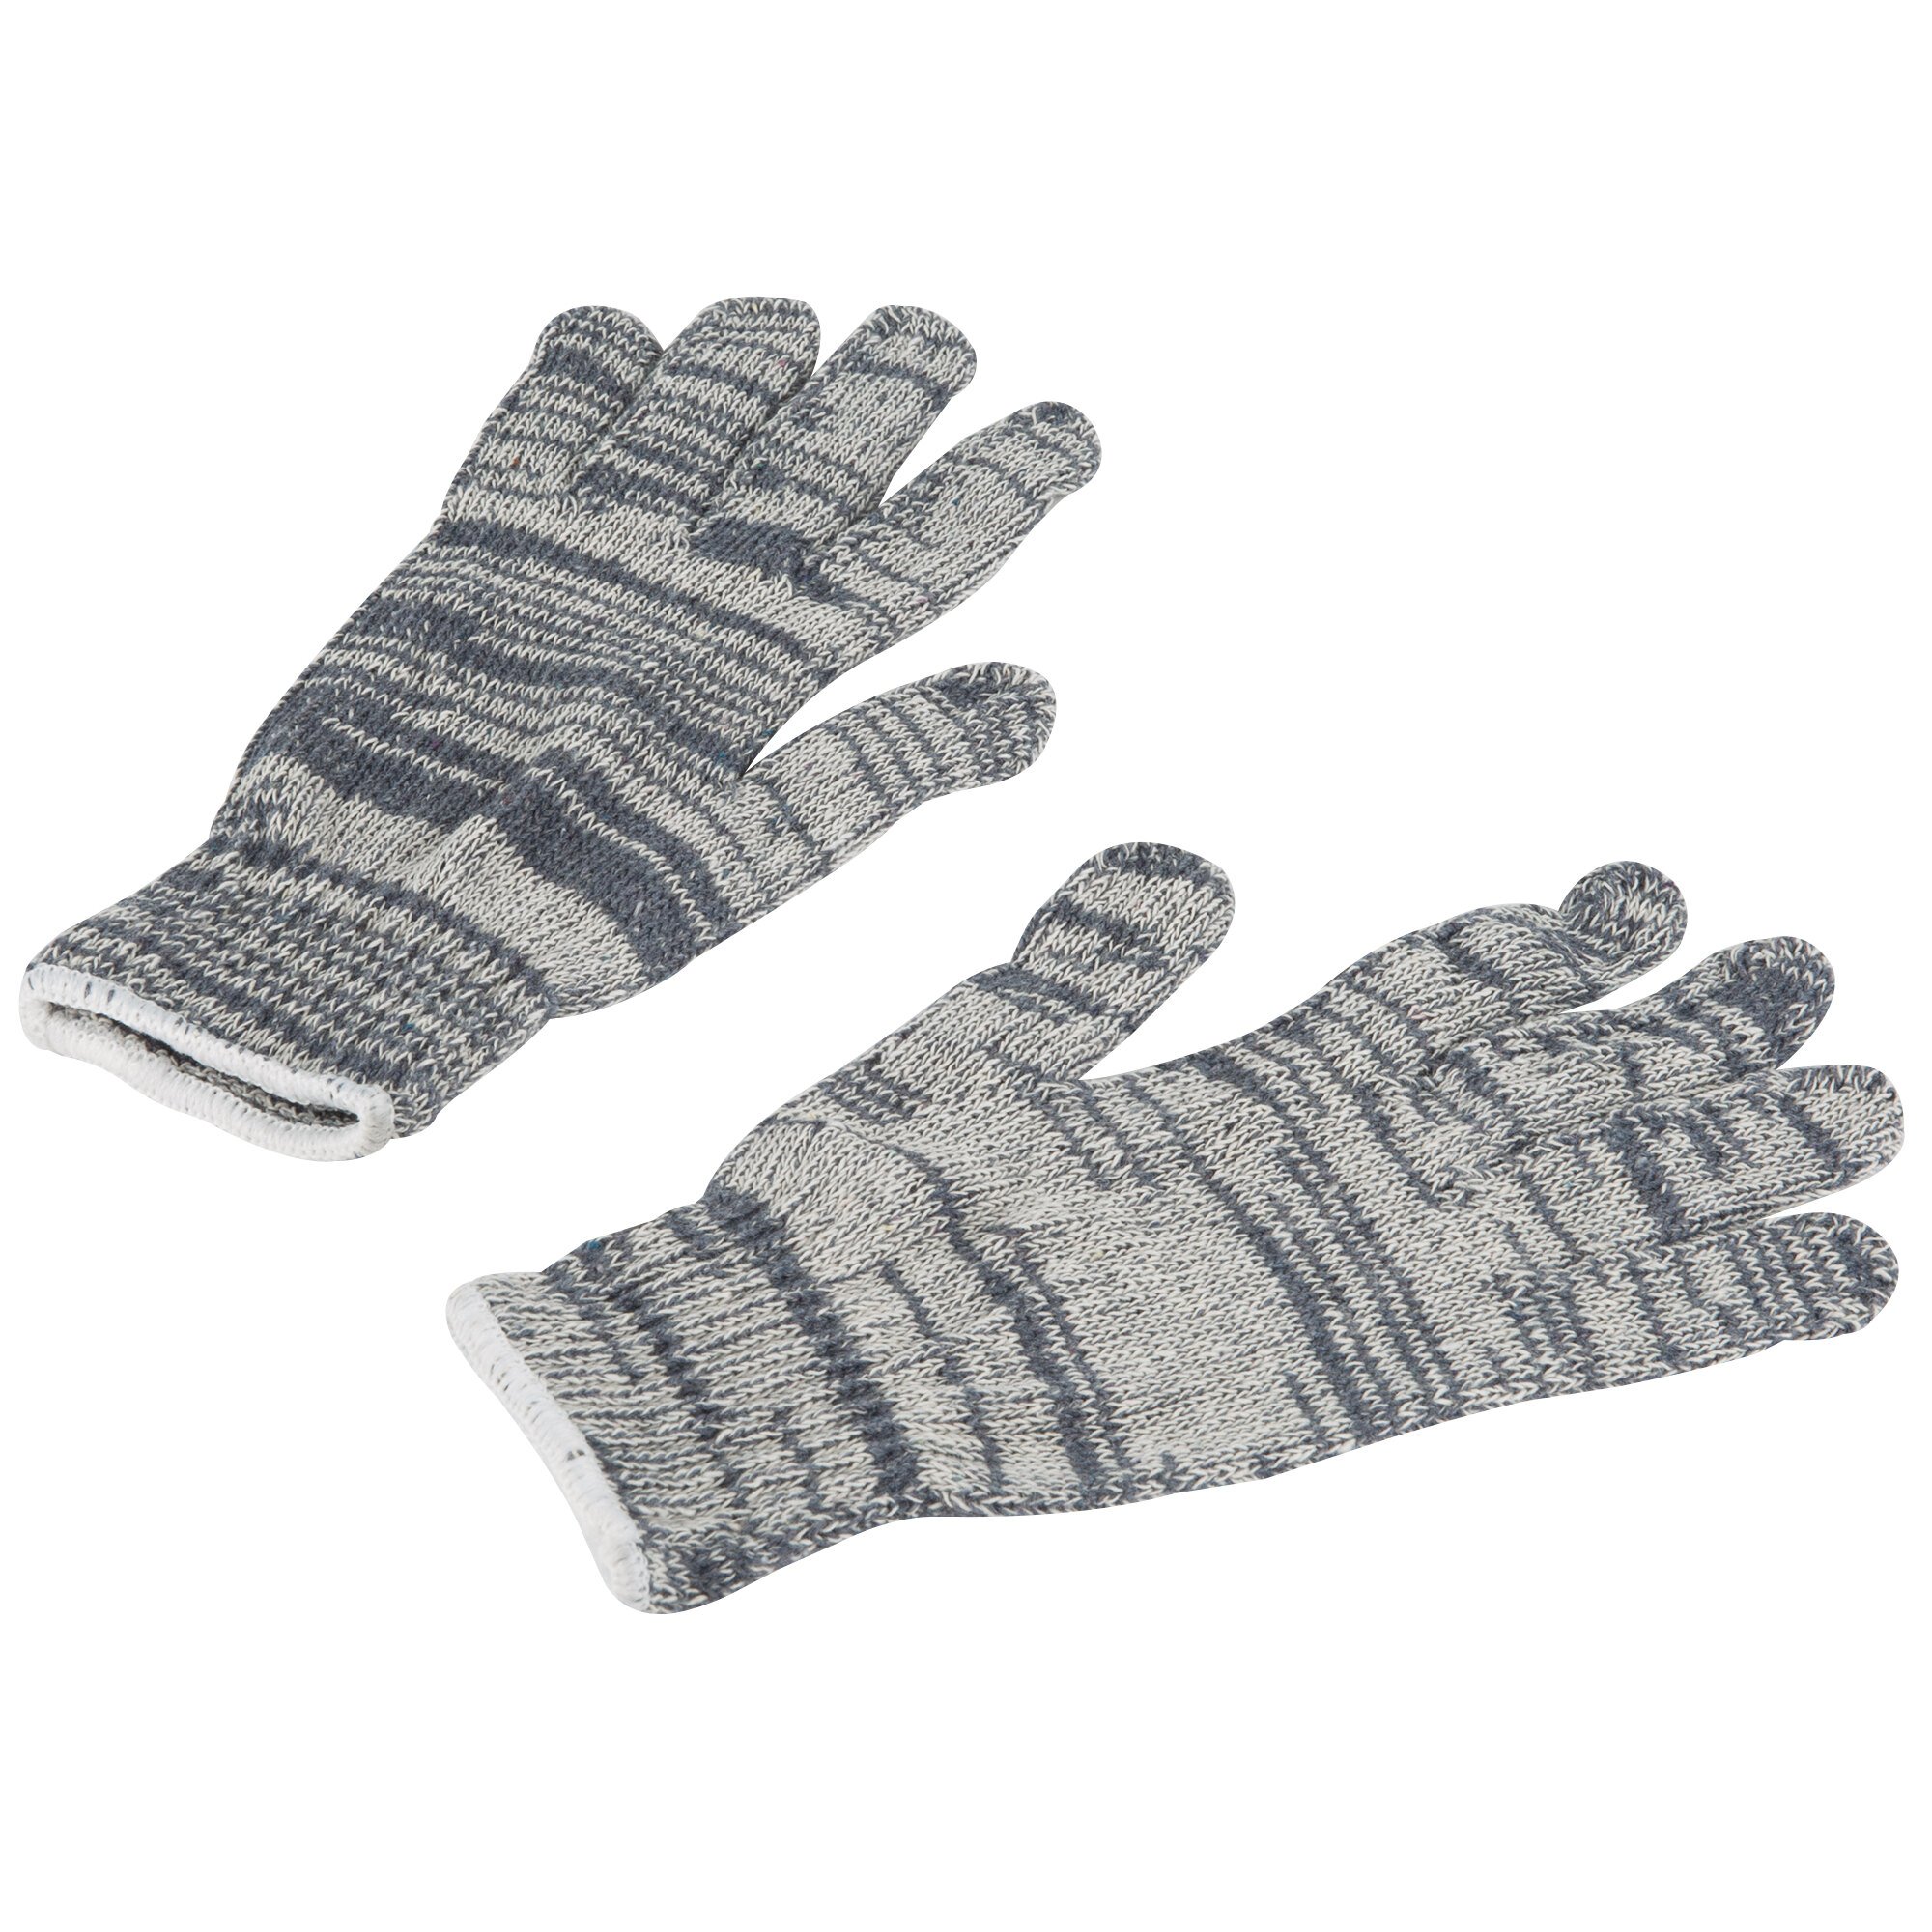 Medium Weight Multi-Color Polyester / Cotton Work Gloves - Large - Pair ...